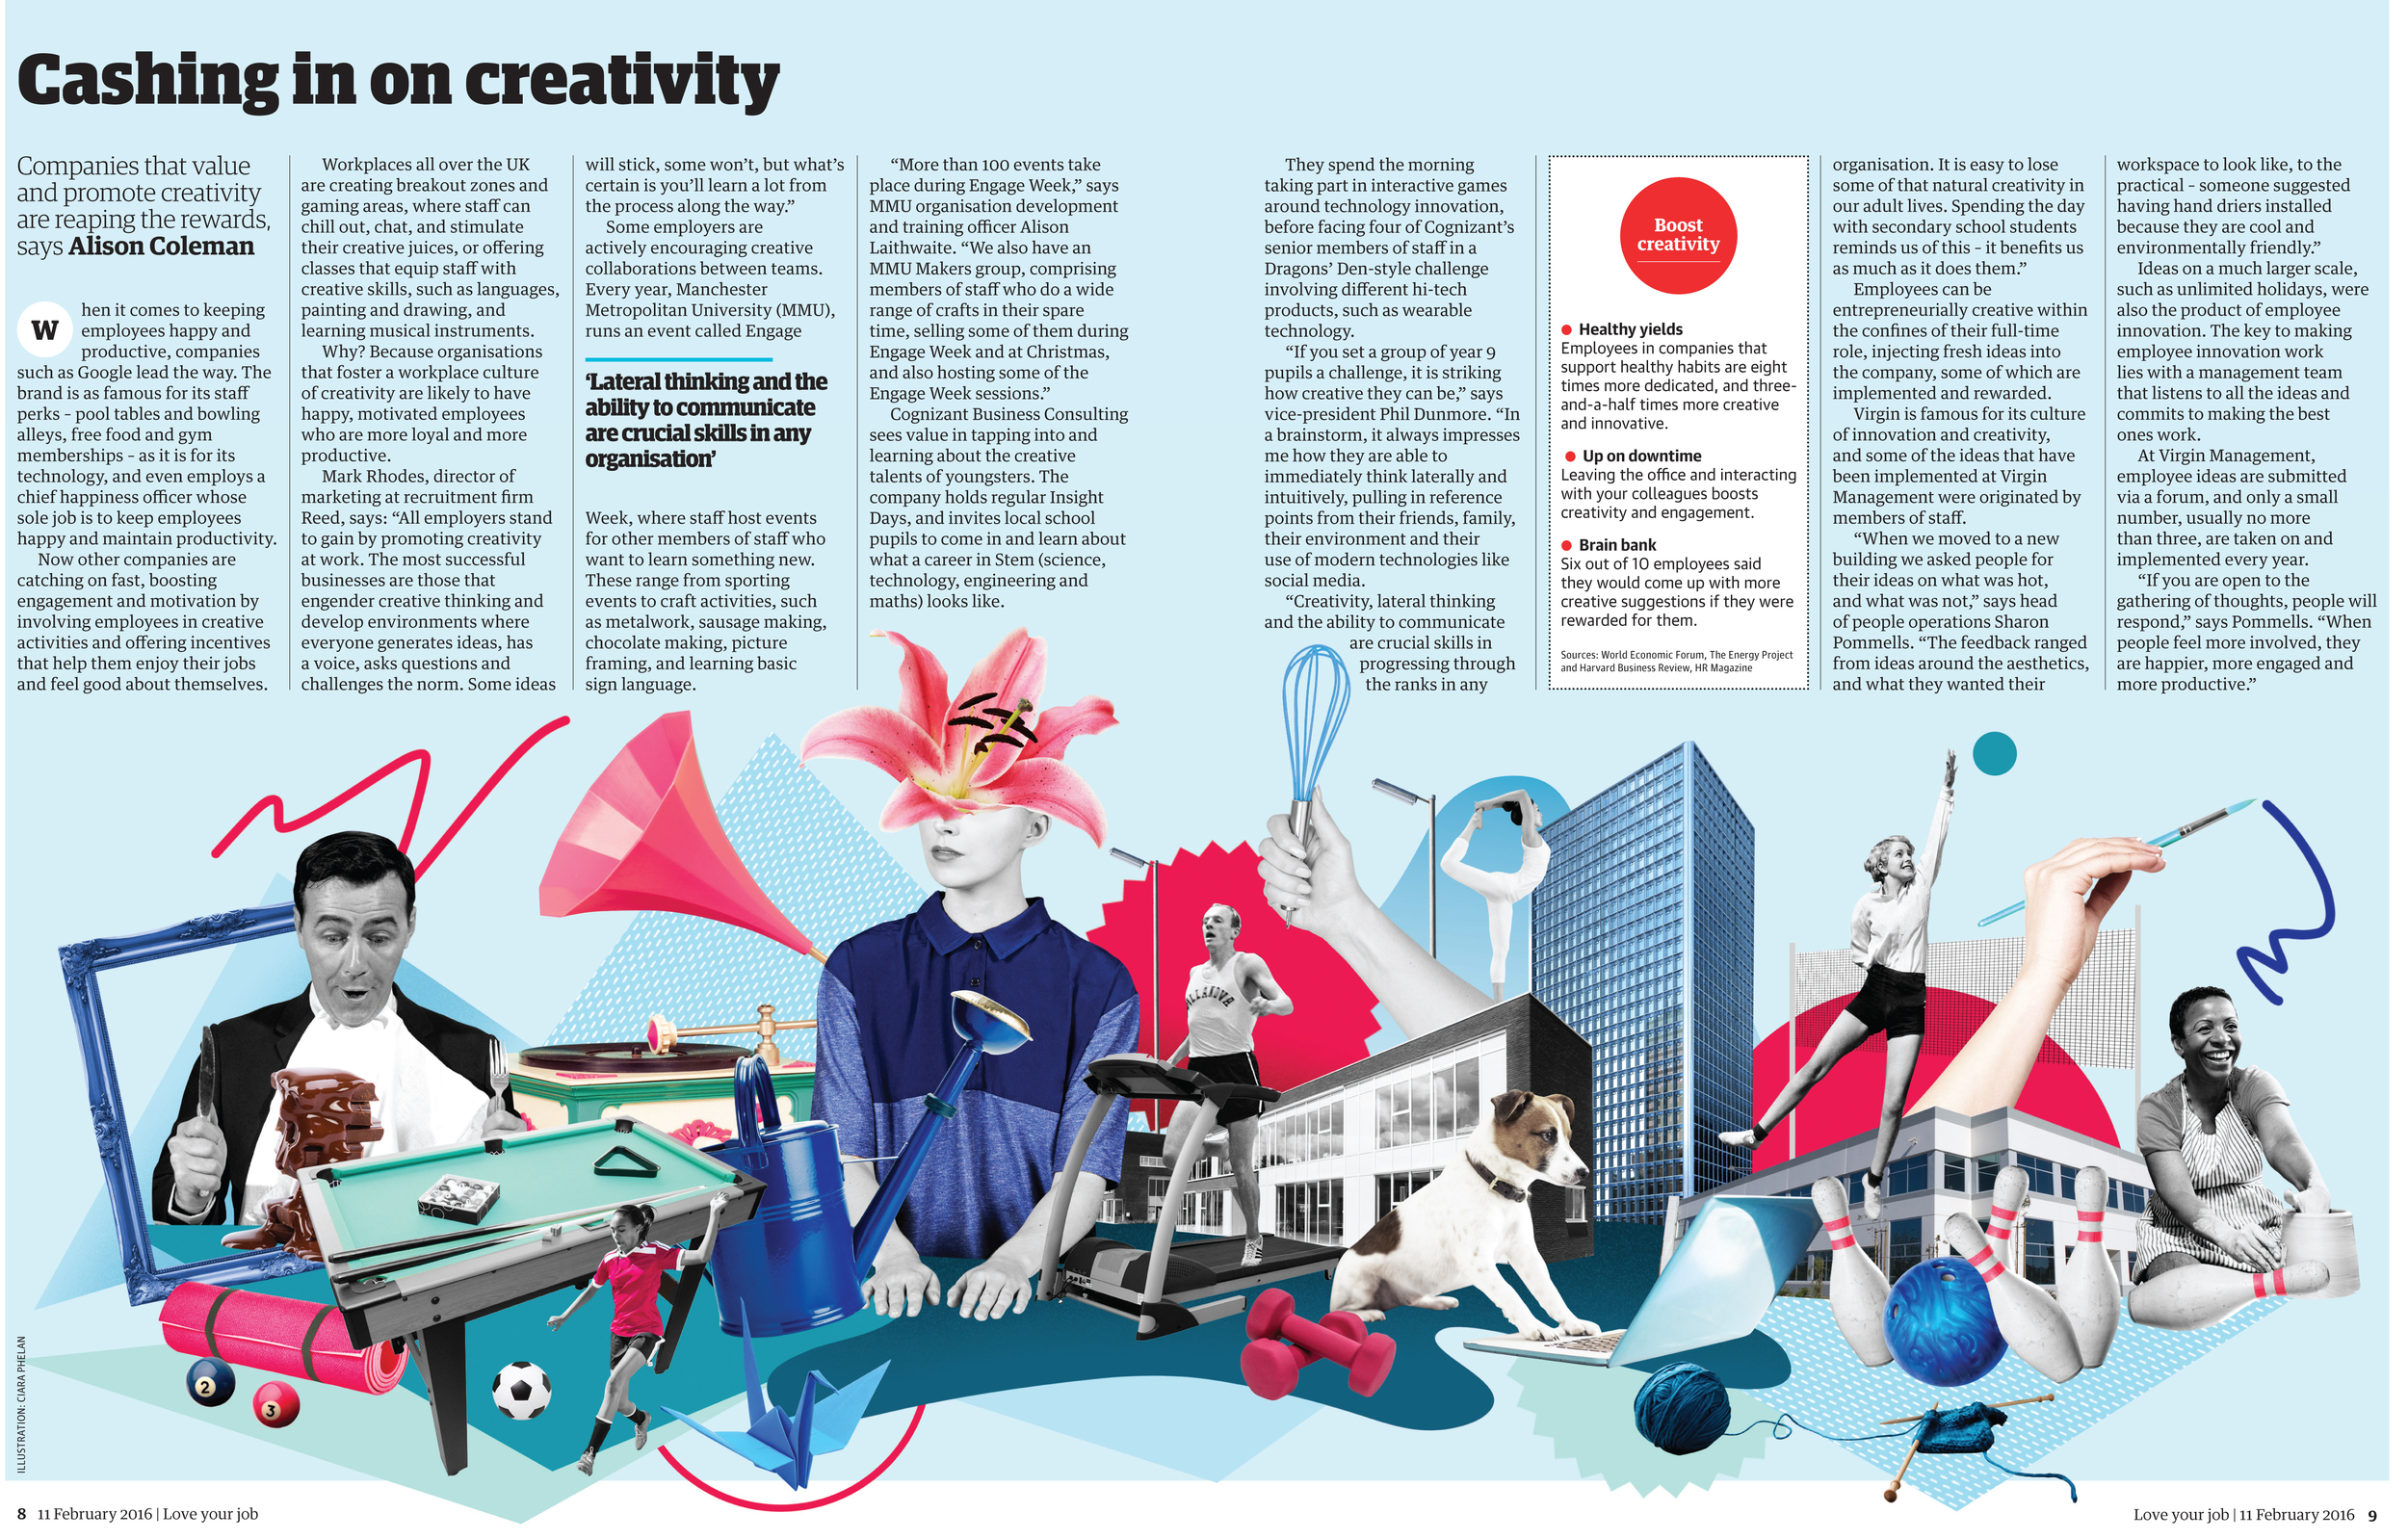 The Guardian's Top Employer's UK. Illustration commission (with image selection)